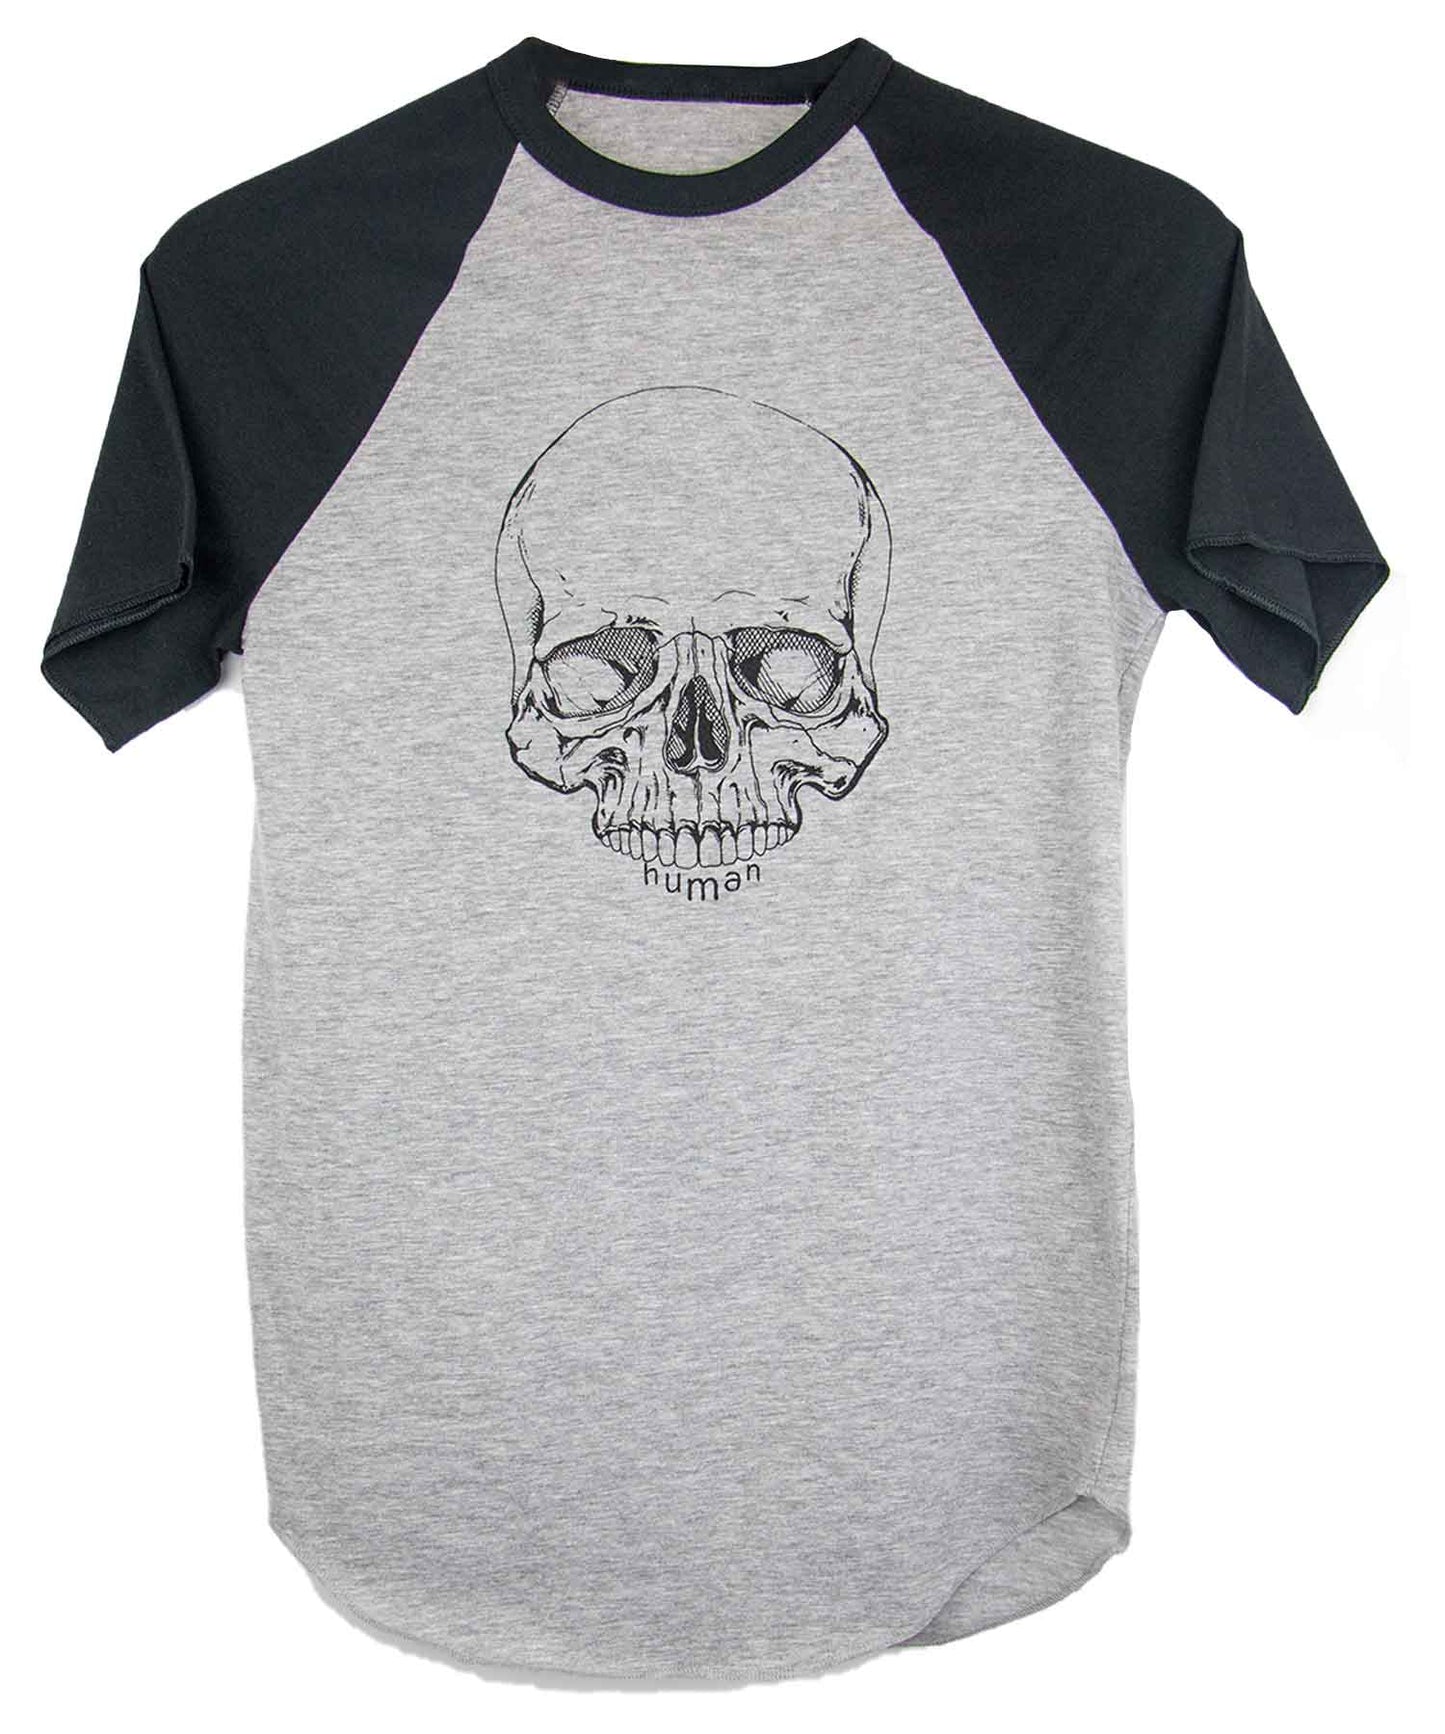 Androgynous Fox short sleeve baseball tee with black sleeves and white body. Skull is printed in black ink.